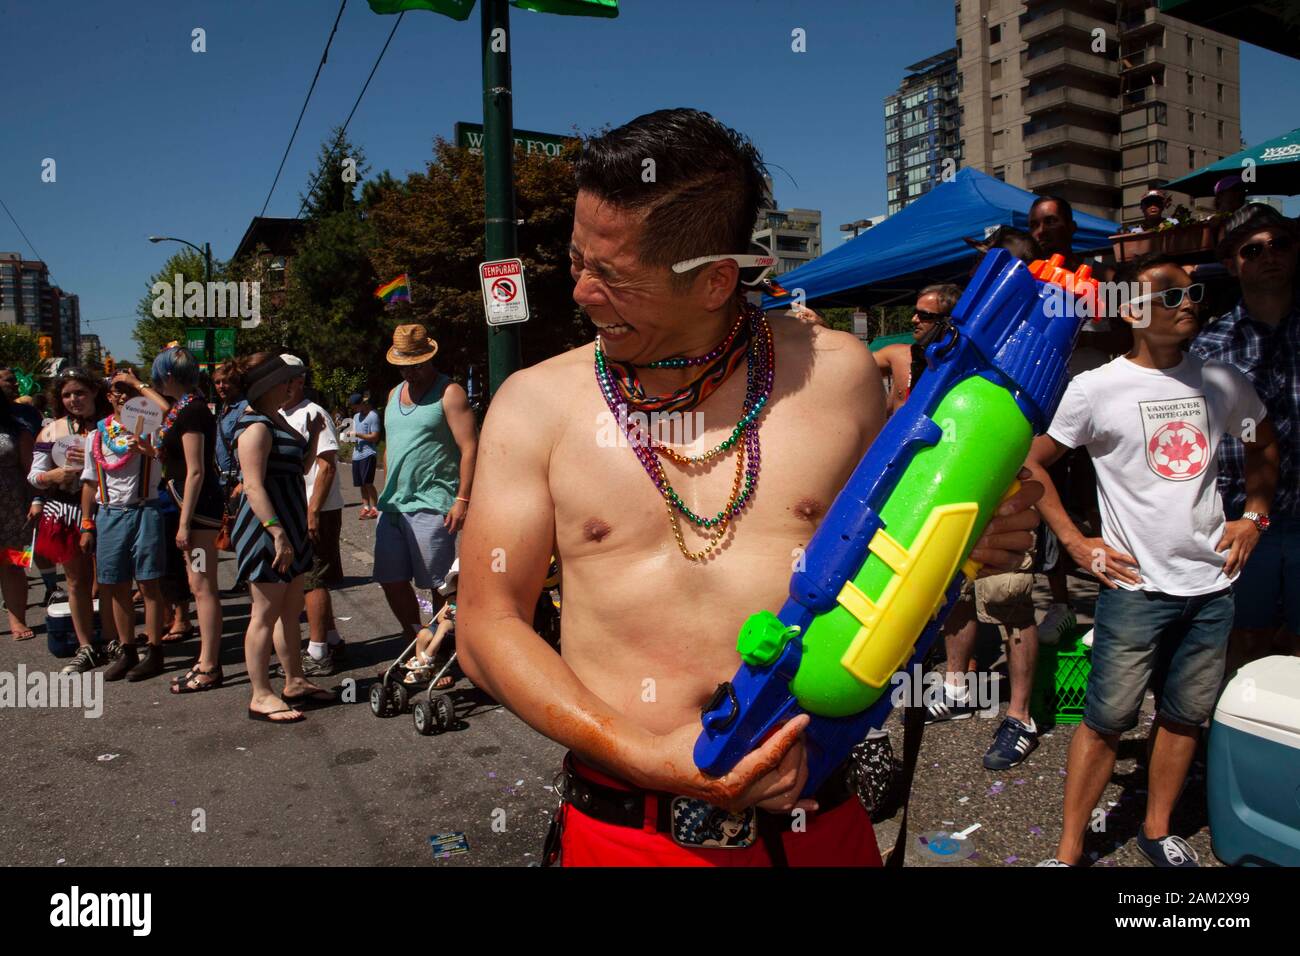 Pride parade participant cooling down with water gun, Vancouver Pride Festival 2014, Vancouver, Canada Stock Photo